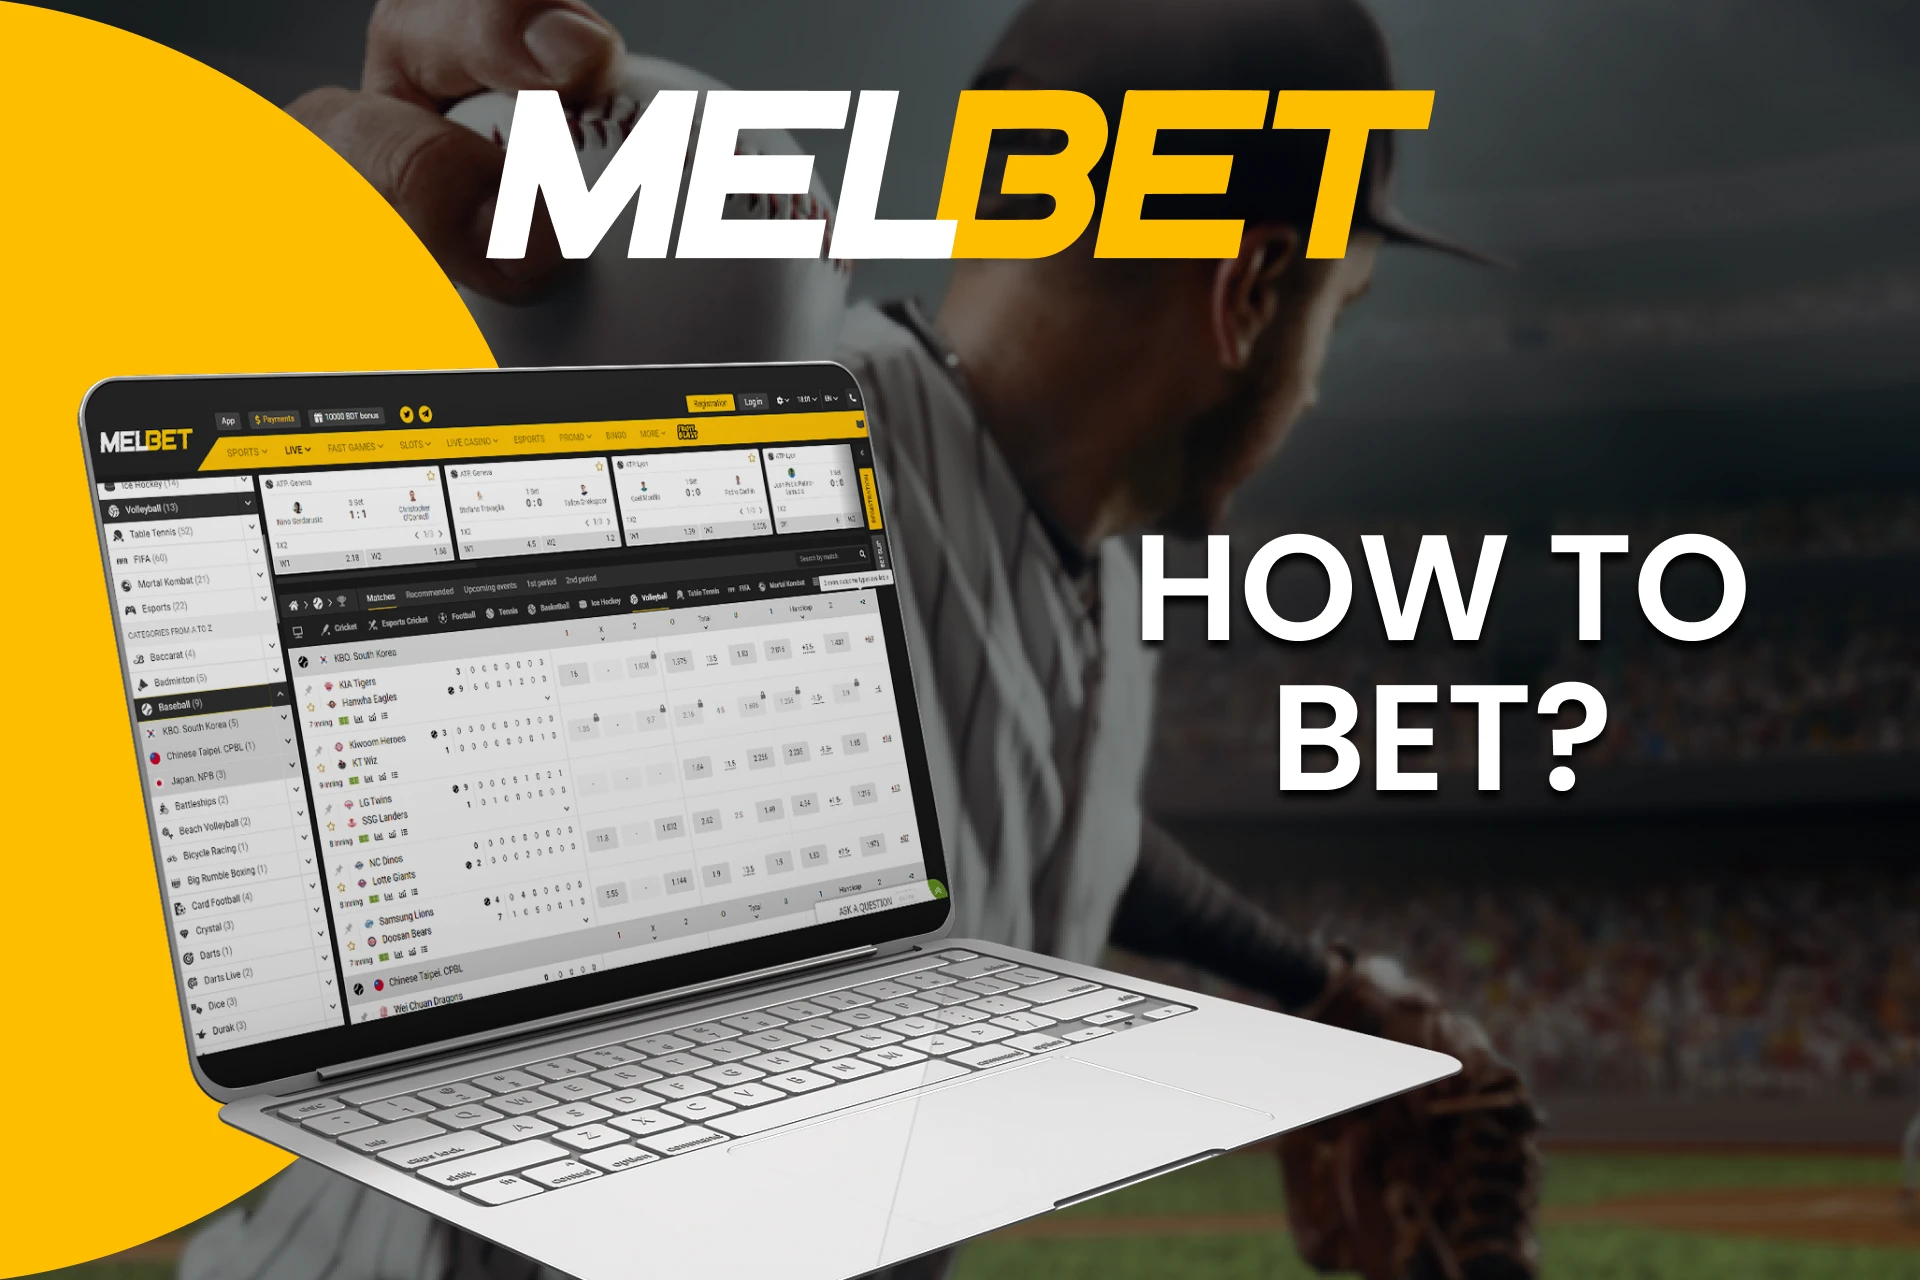 Choose the sports section for betting on baseball from Melbet.